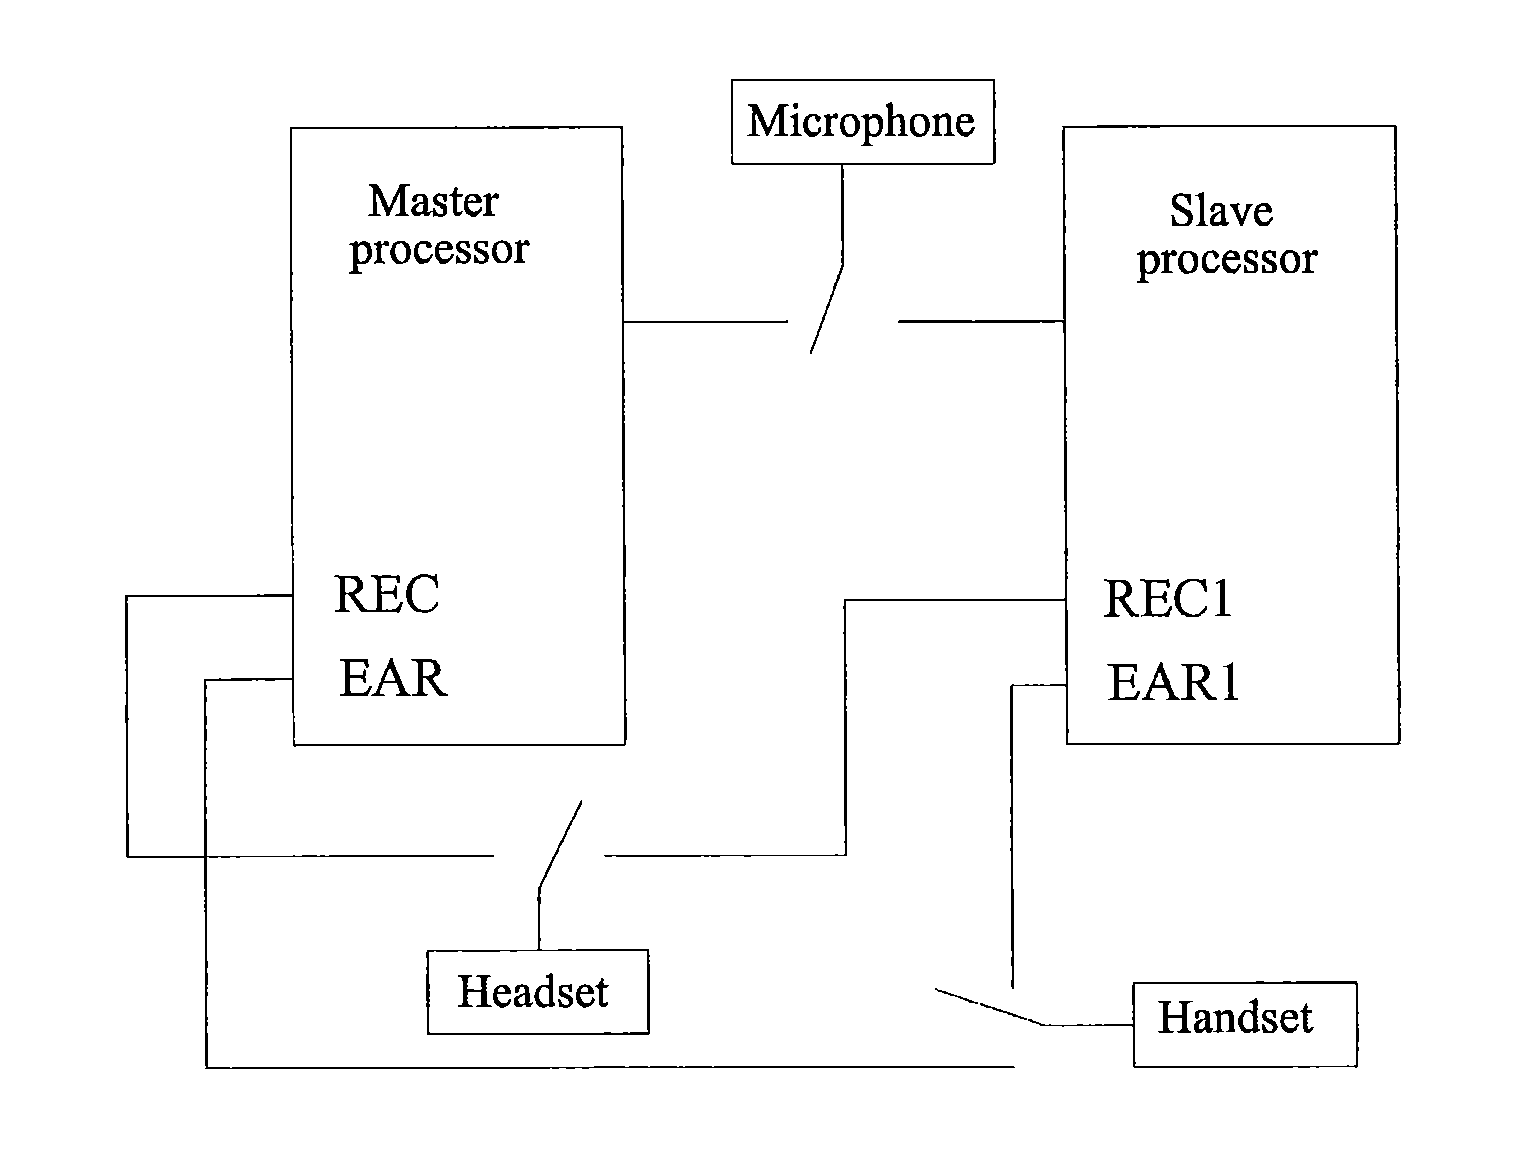 Method and terminal for talk recording implementation